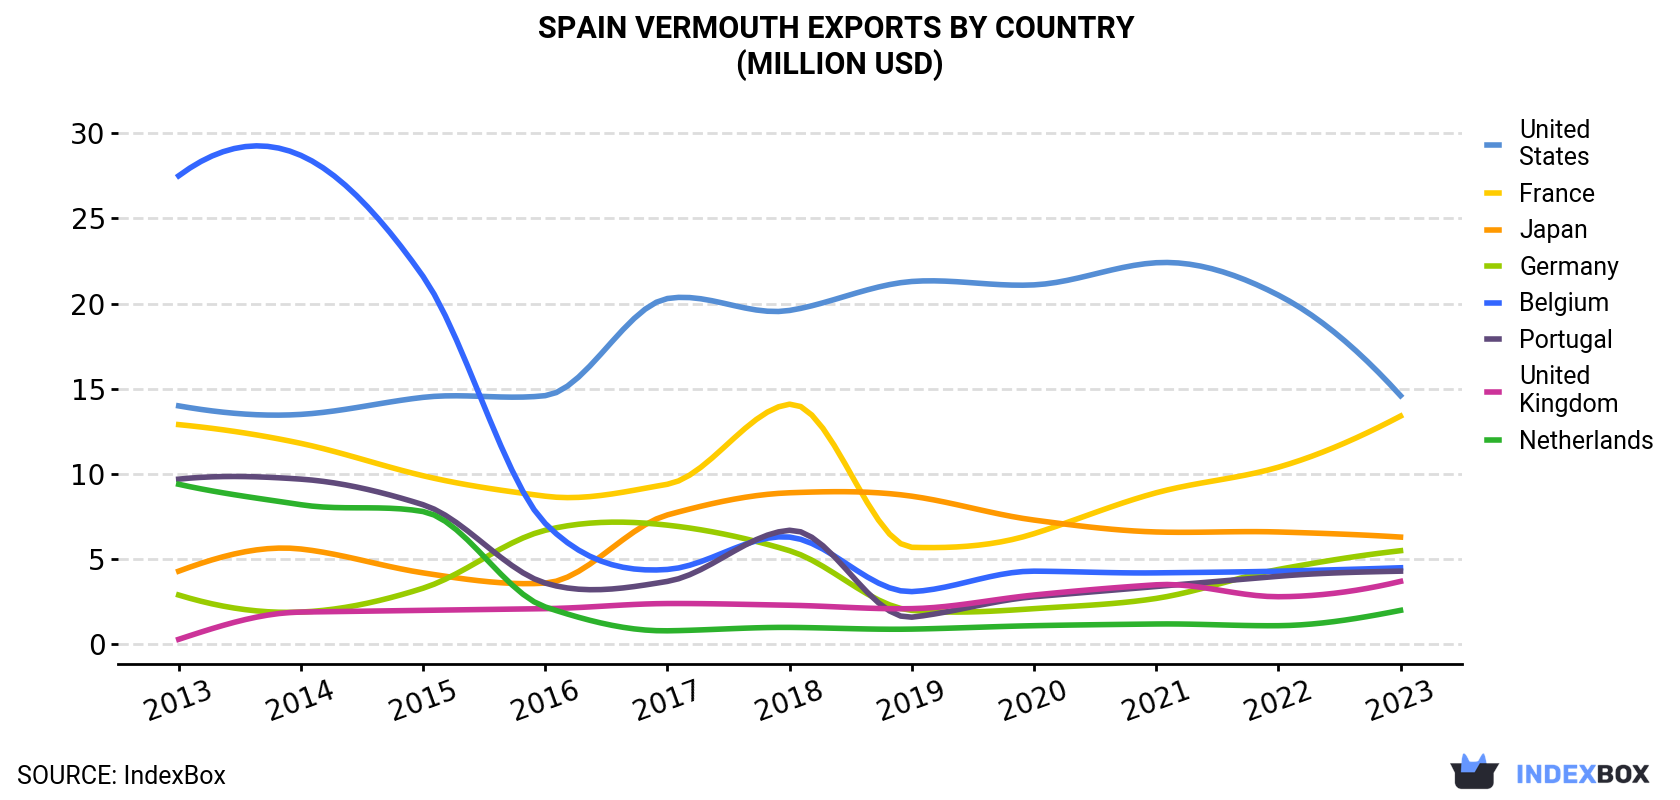 Spain Vermouth Exports By Country (Million USD)